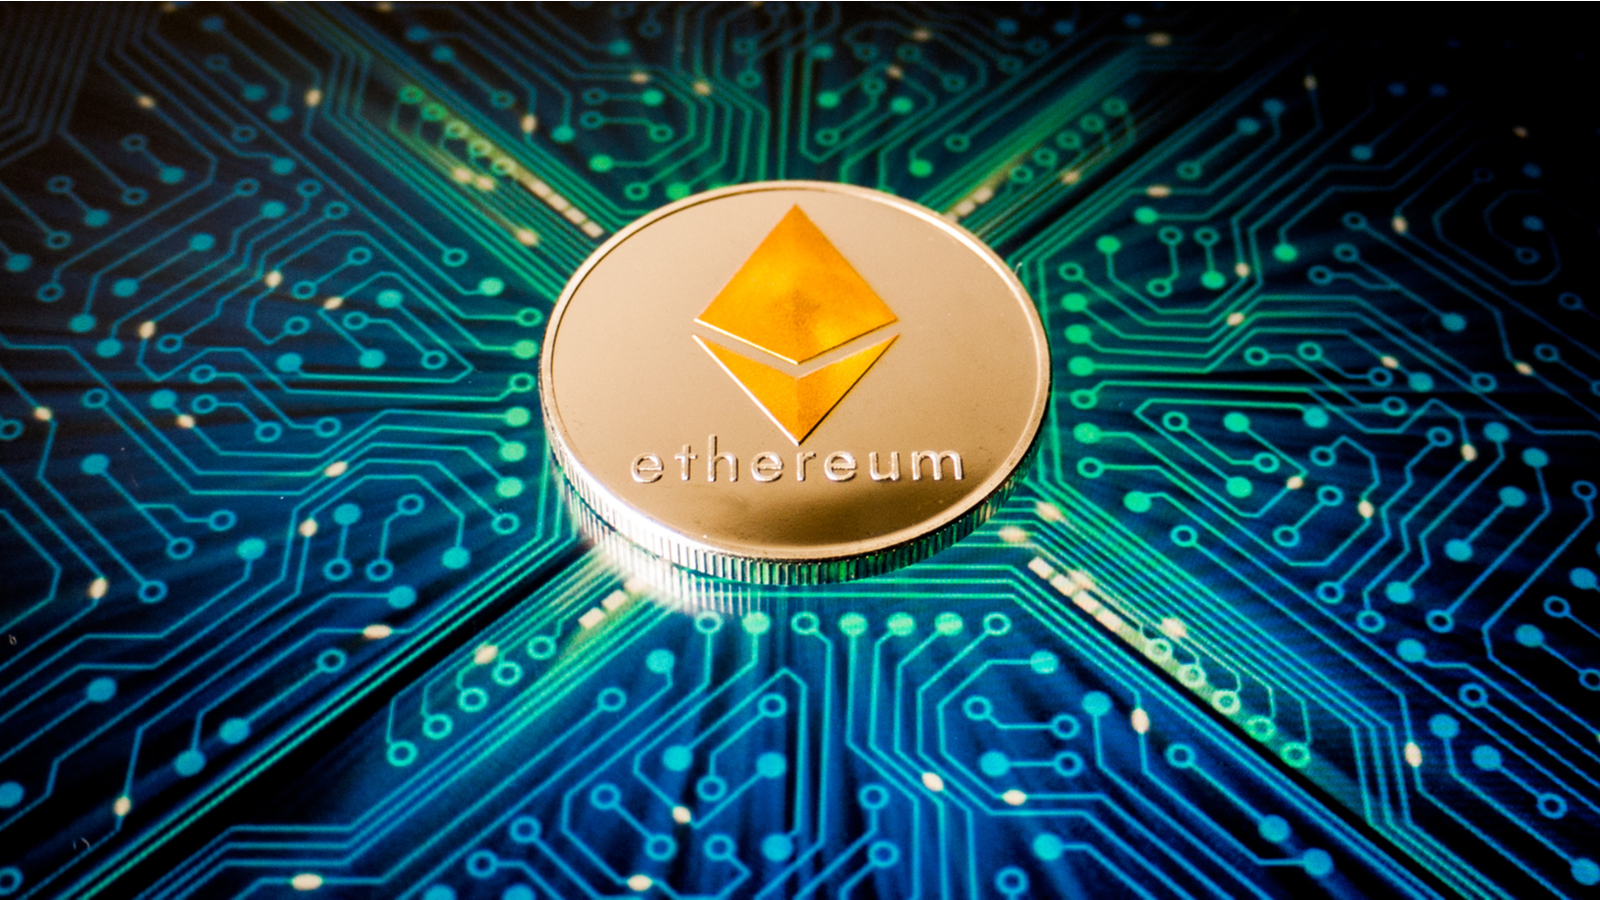 Another stylized version of the Ethereum logo